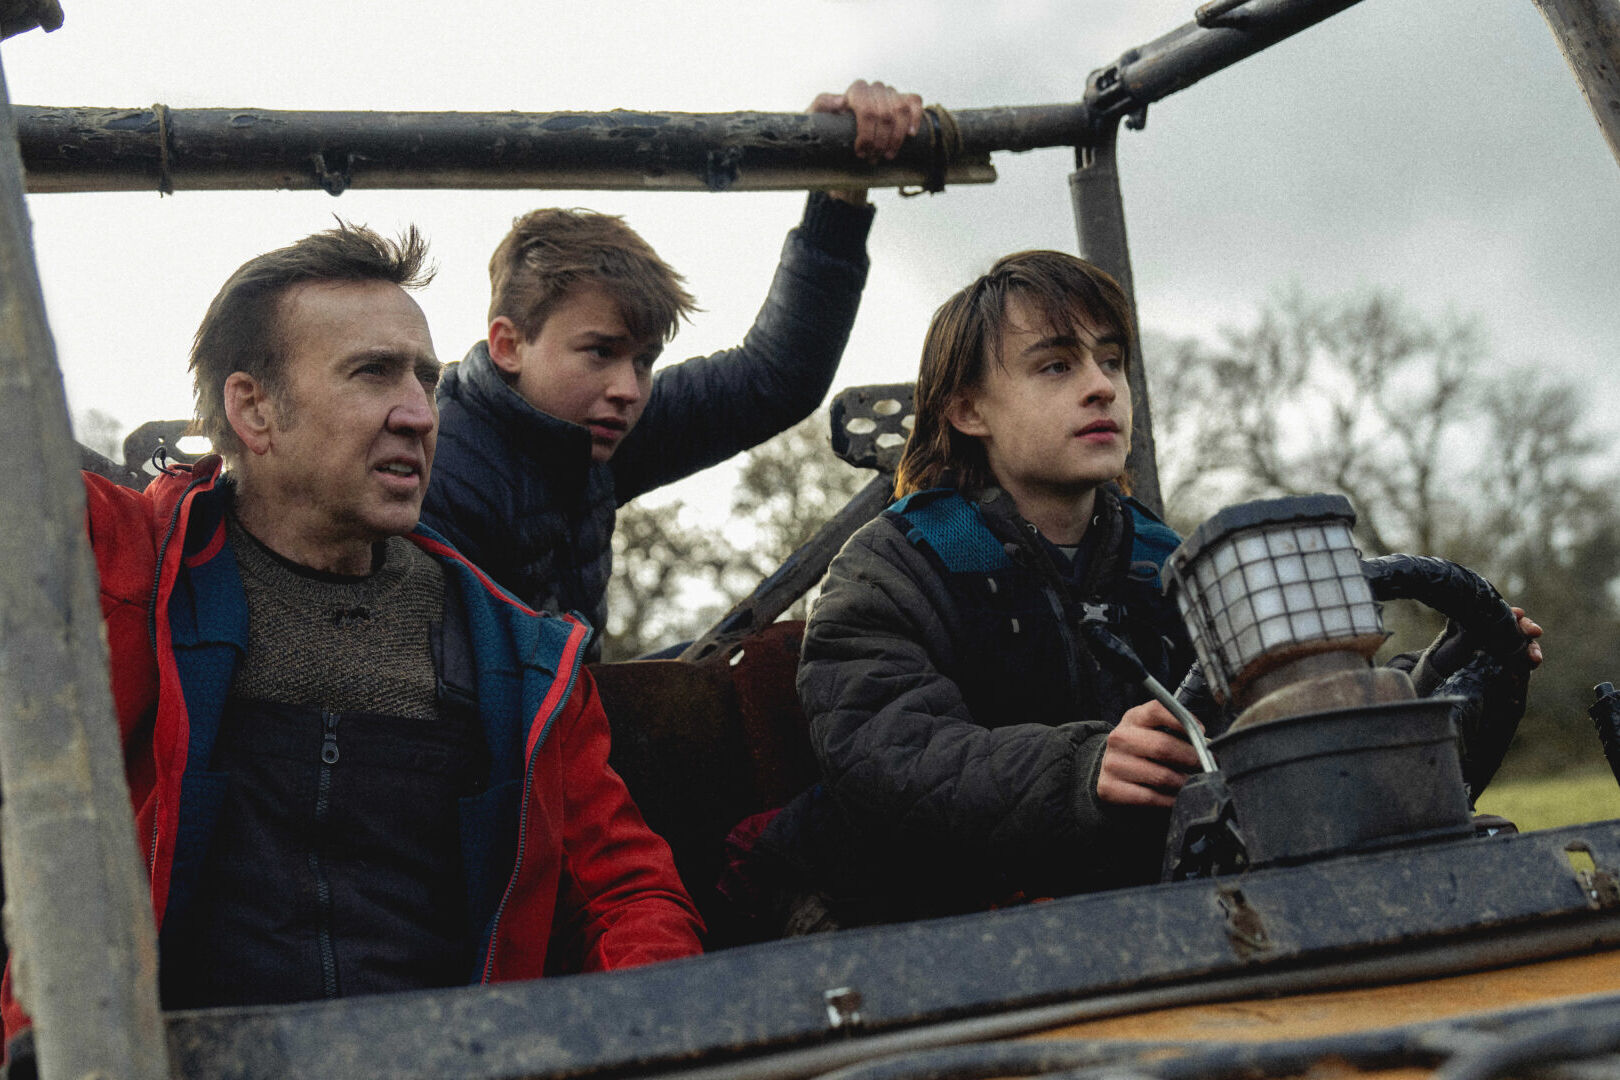 Nicolas Cage, Maxwell Jenkins, and Jaeden Martell in ARCADIAN, a film by Benjamin Brewer. Courtesy of RLJE Films and Shudder. An RLJE Films and Shudder Release.